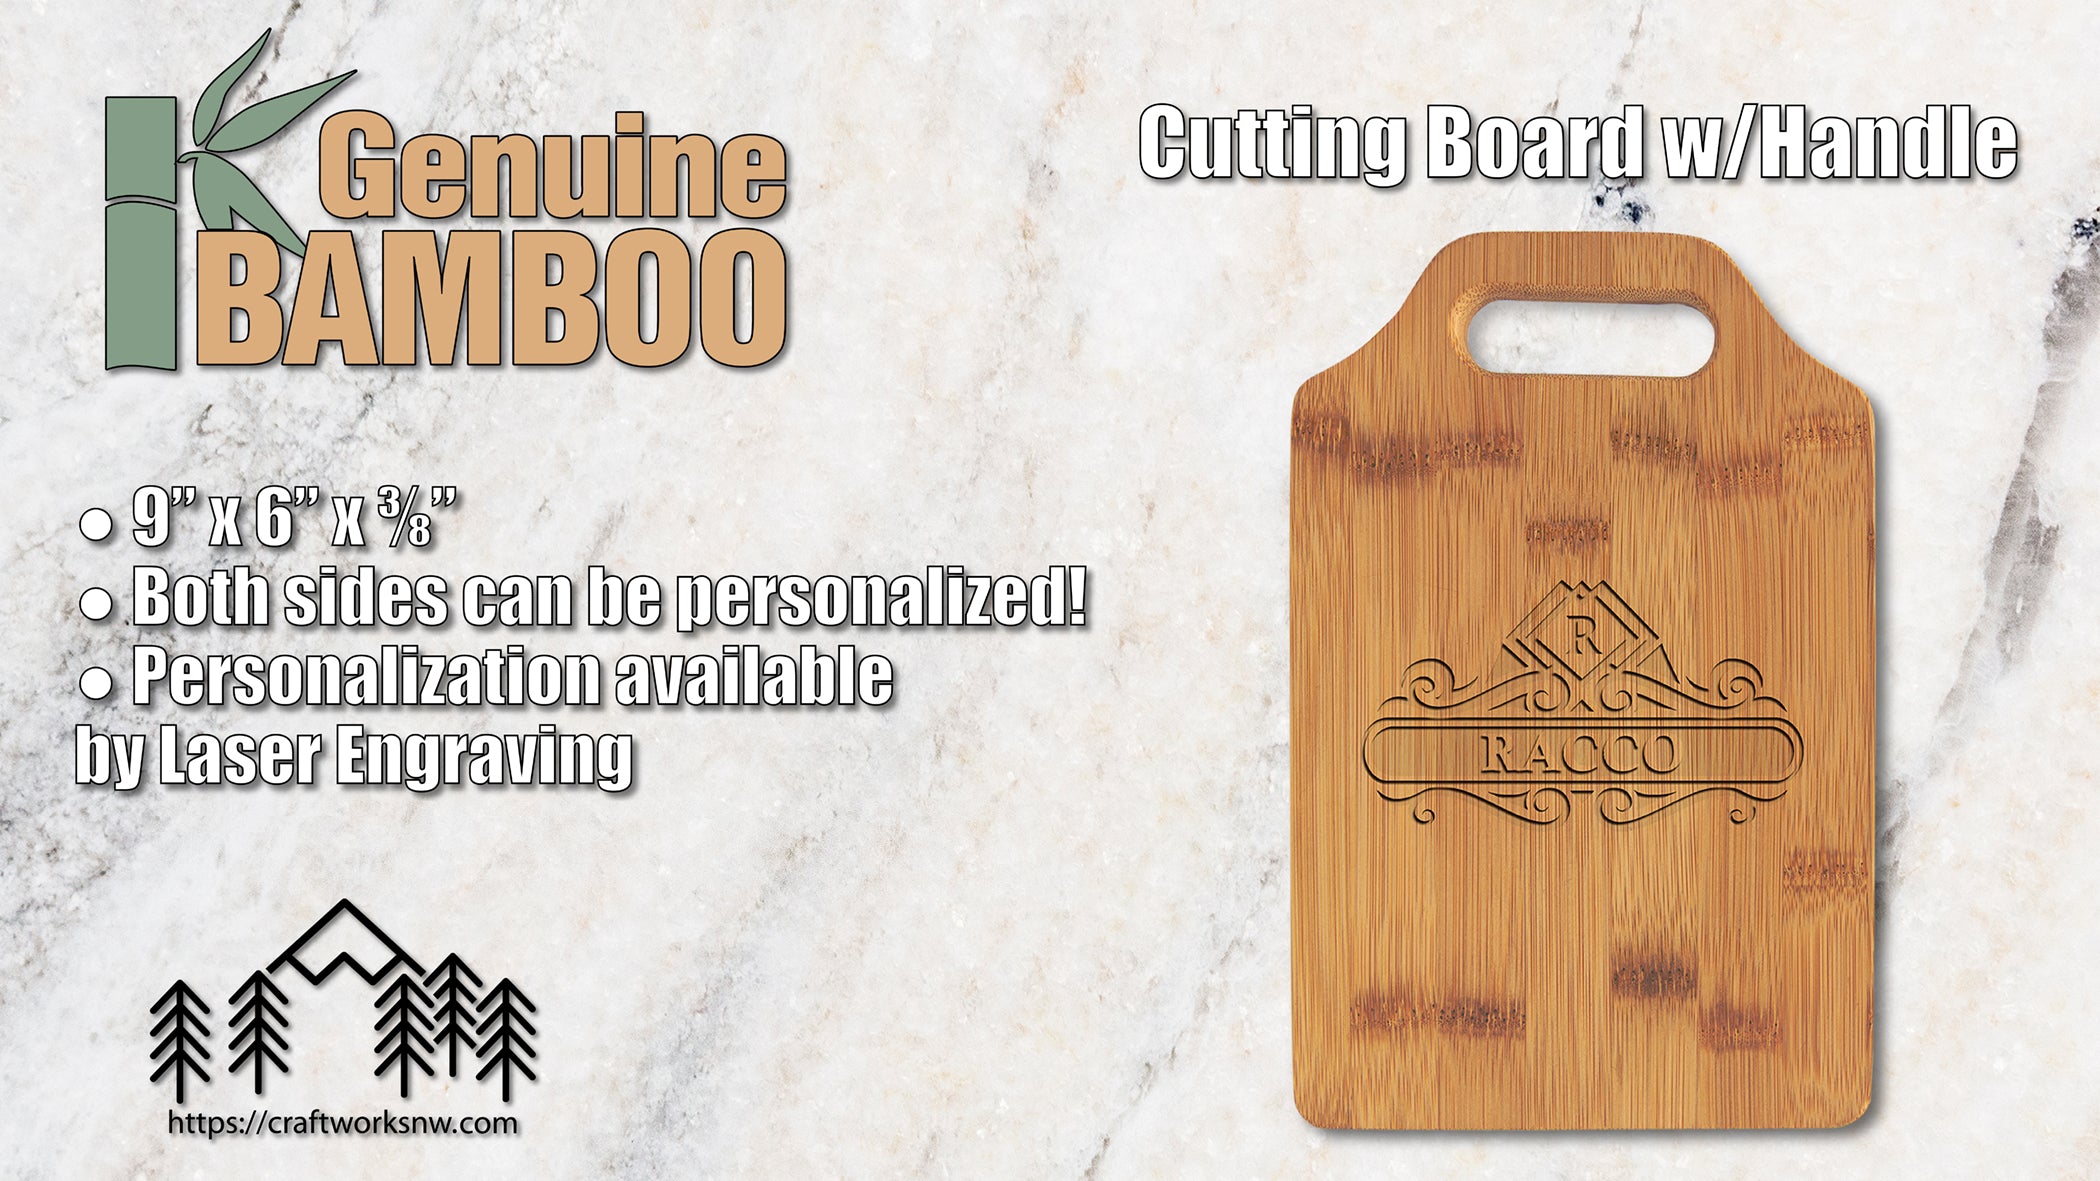 Cutting Board with Handle, Bamboo, 9" x 6", Laser Engraved - Craftworks NW, LLC